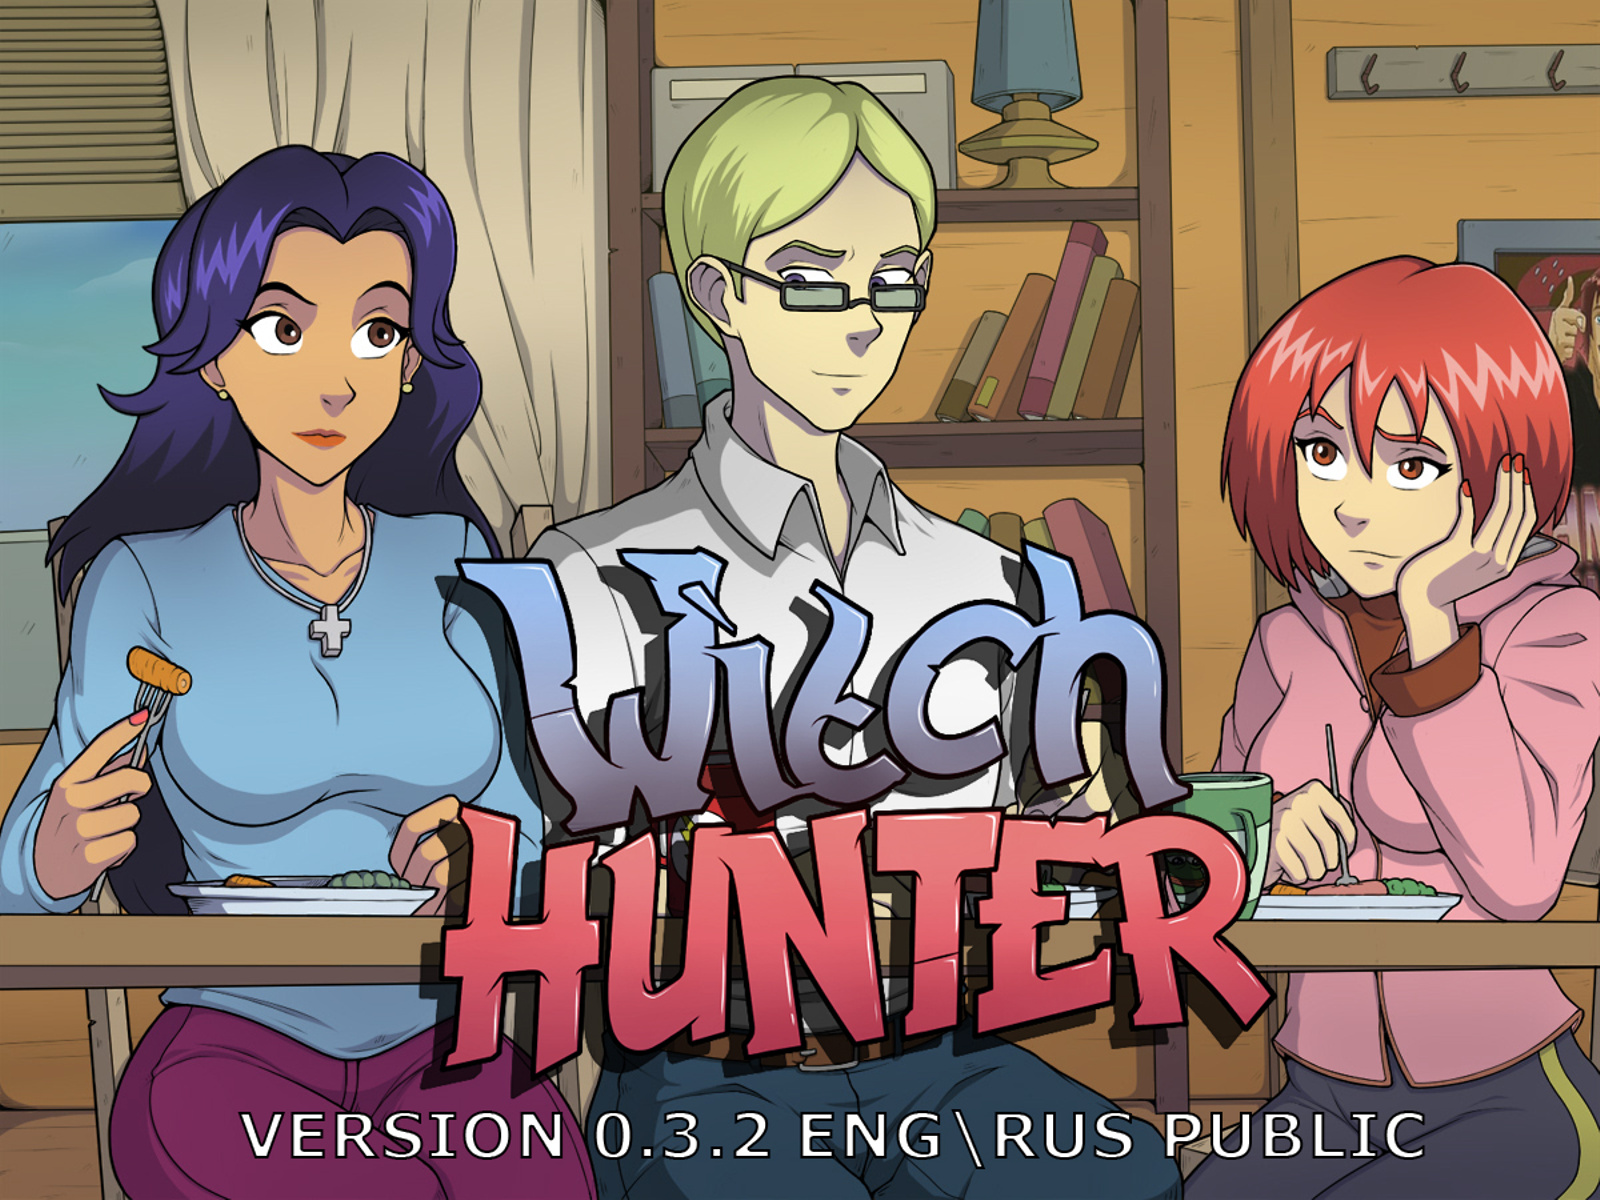 Public release Witch Hunter 0.3.2 ENG\RUS. https://www.patreon.com/posts/21...